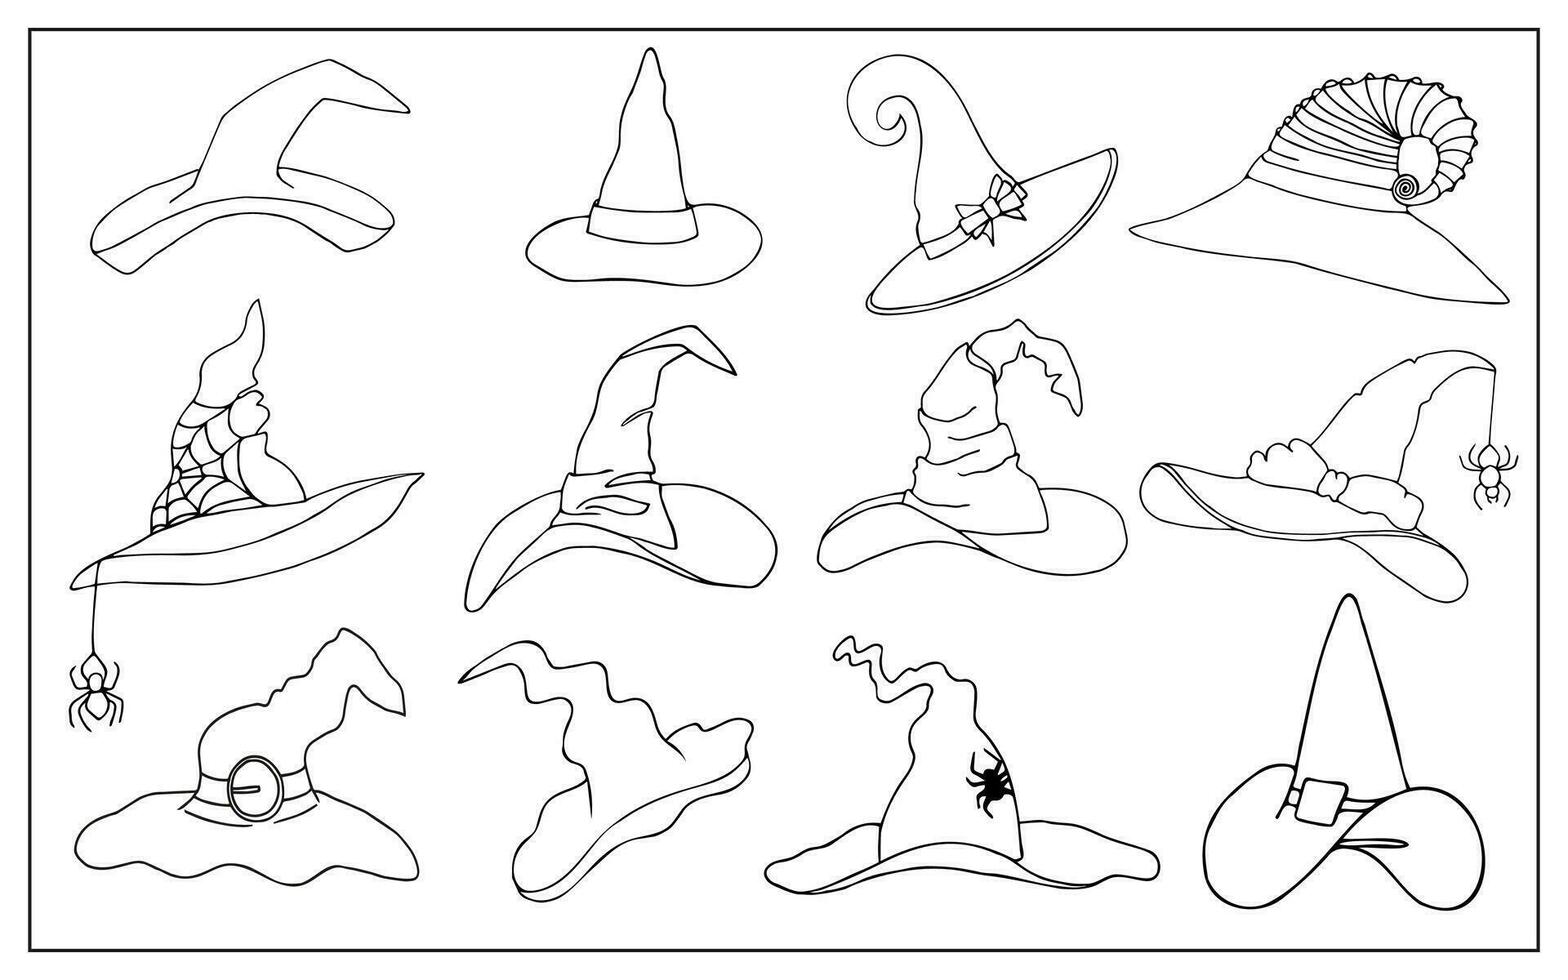 Set of Halloween hats. Cartoon witch, magician and wizard hats or caps. Fantasy character costume elements with spider webs, buckles and bows for coloring books vector